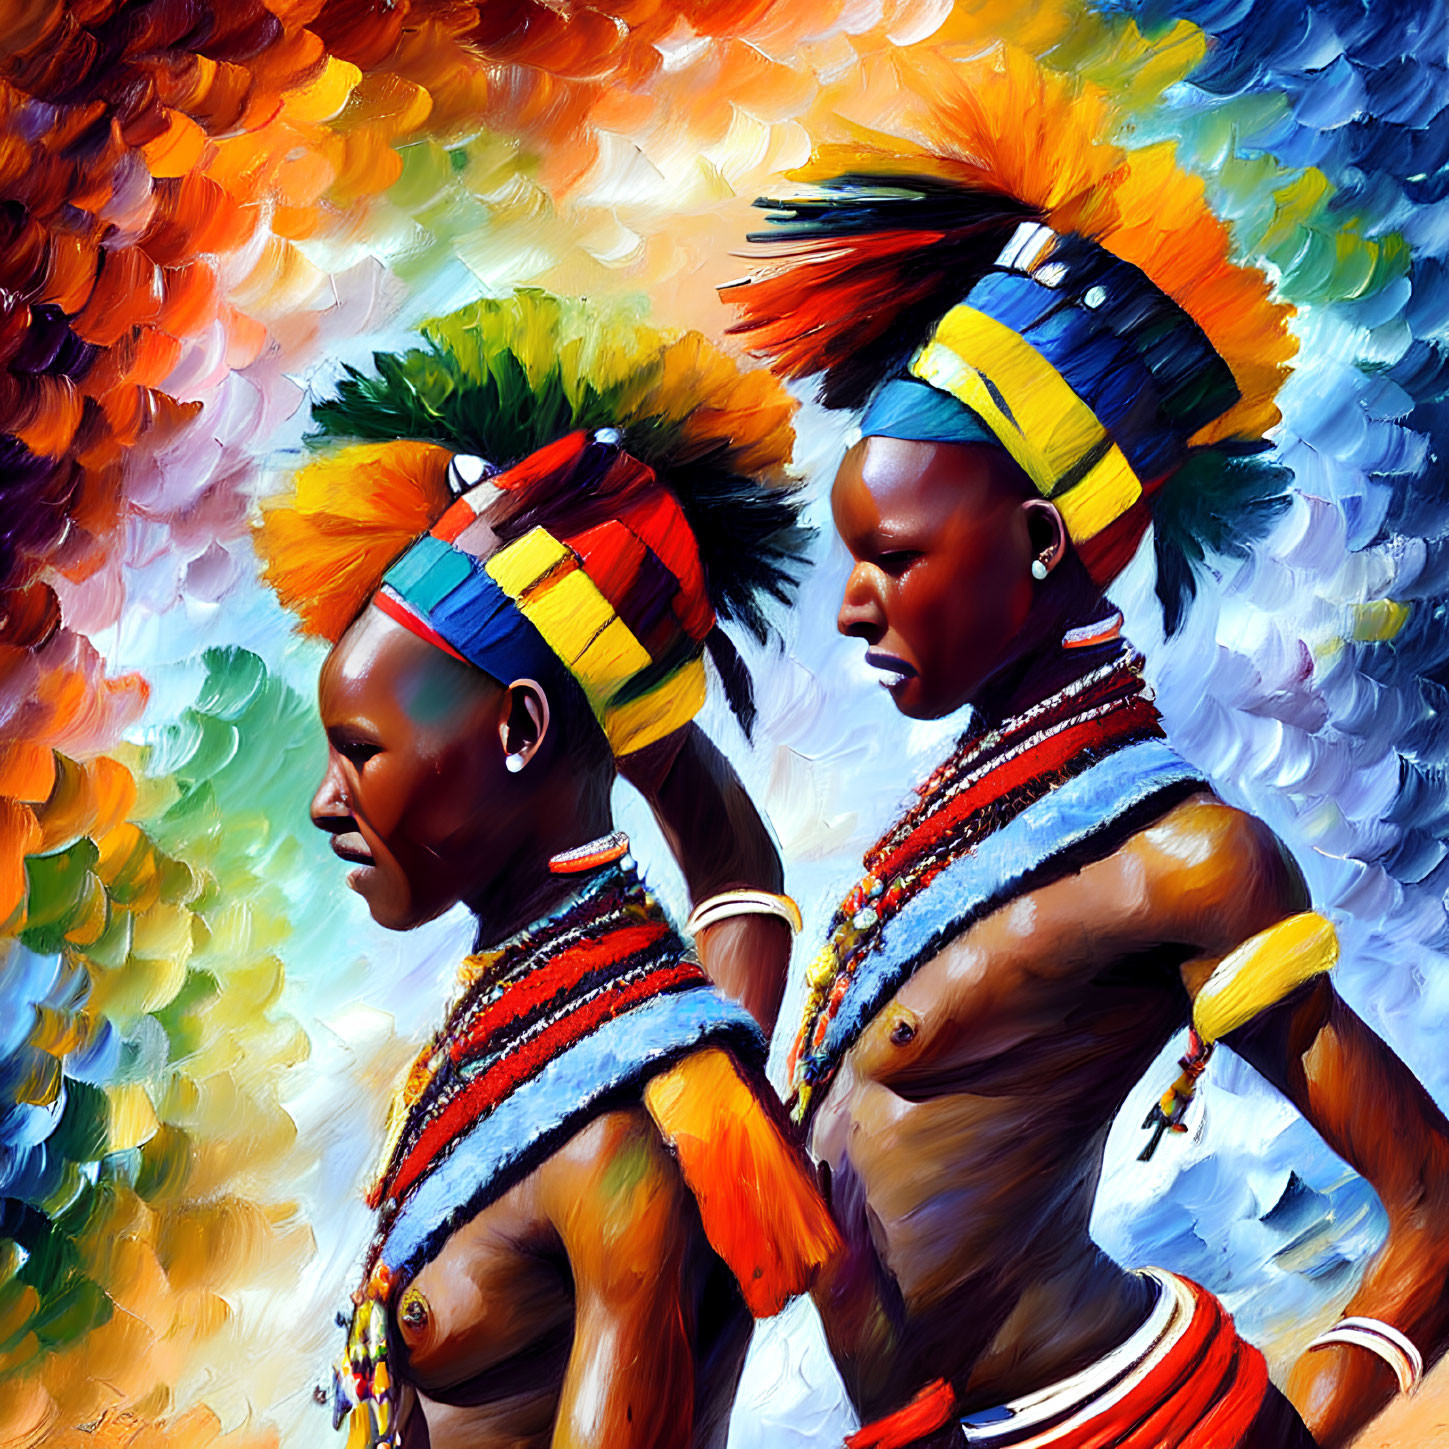 Vibrant African attire painting of two women in colorful headdresses